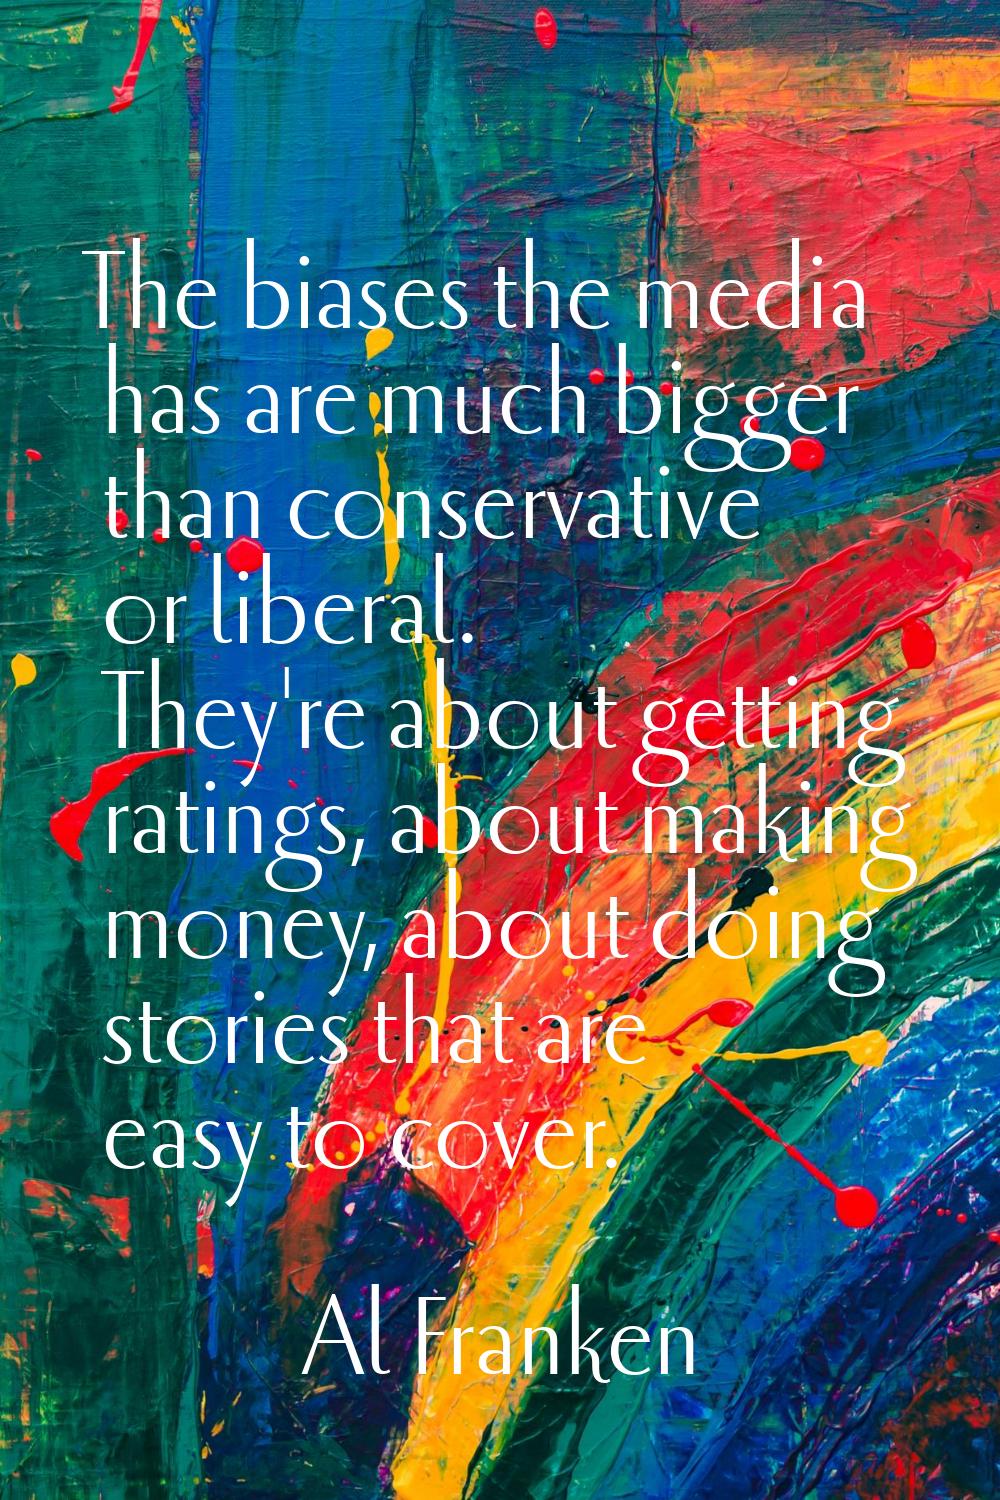 The biases the media has are much bigger than conservative or liberal. They're about getting rating